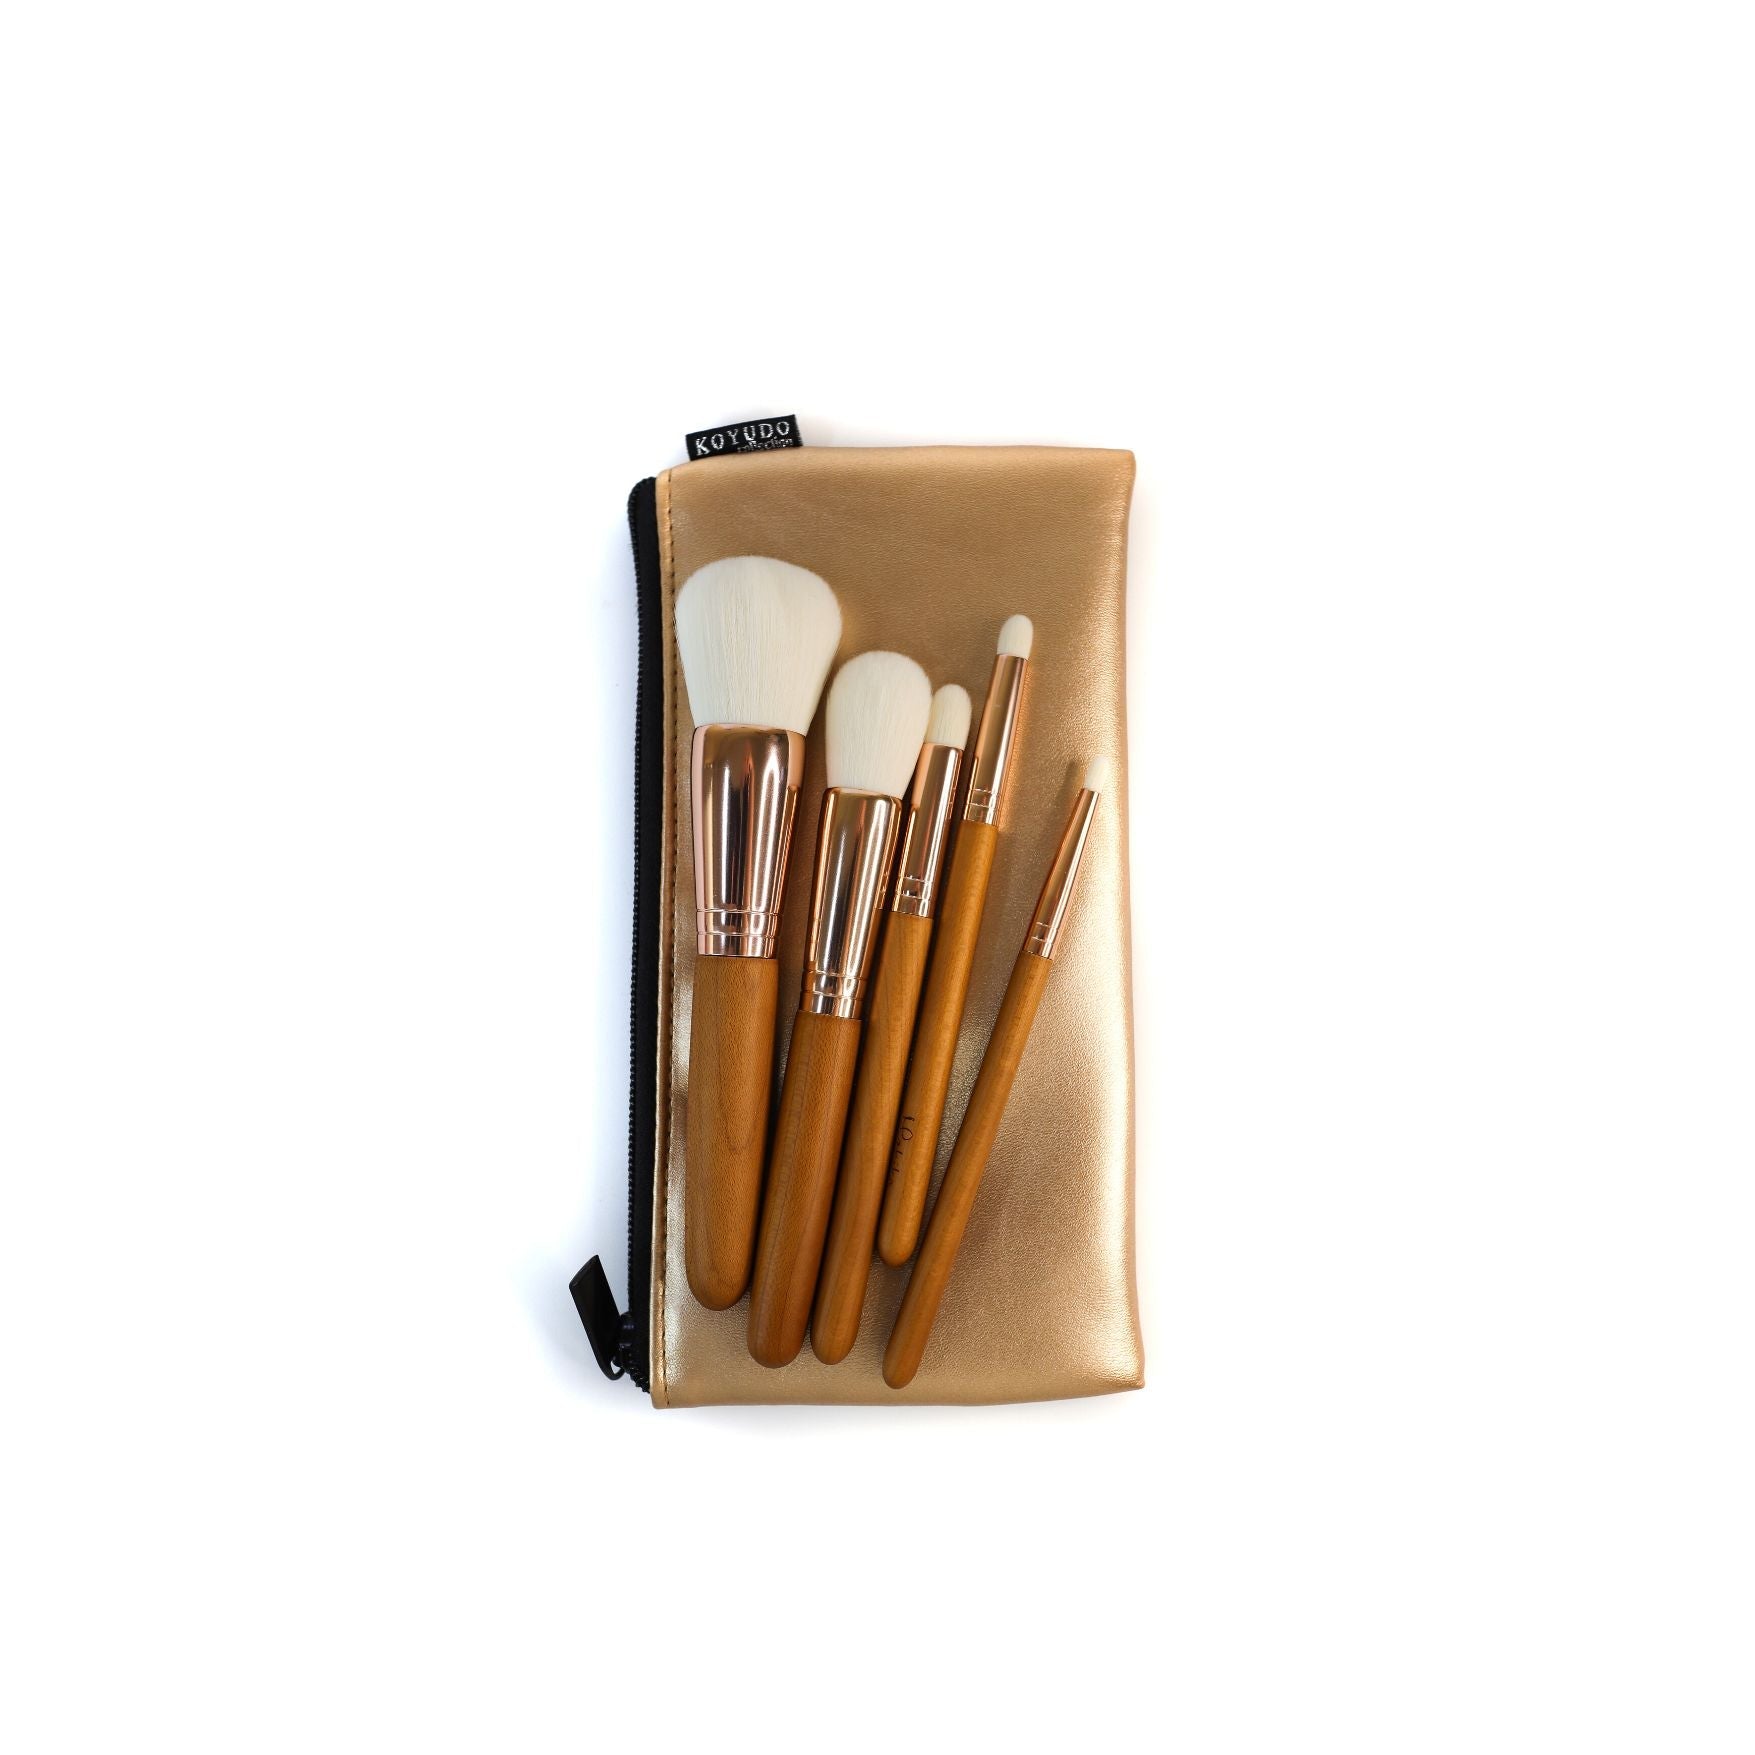 Koyudo Makiko Series 5 pieces Set With Pouch - Fude Beauty, Japanese Makeup Brushes